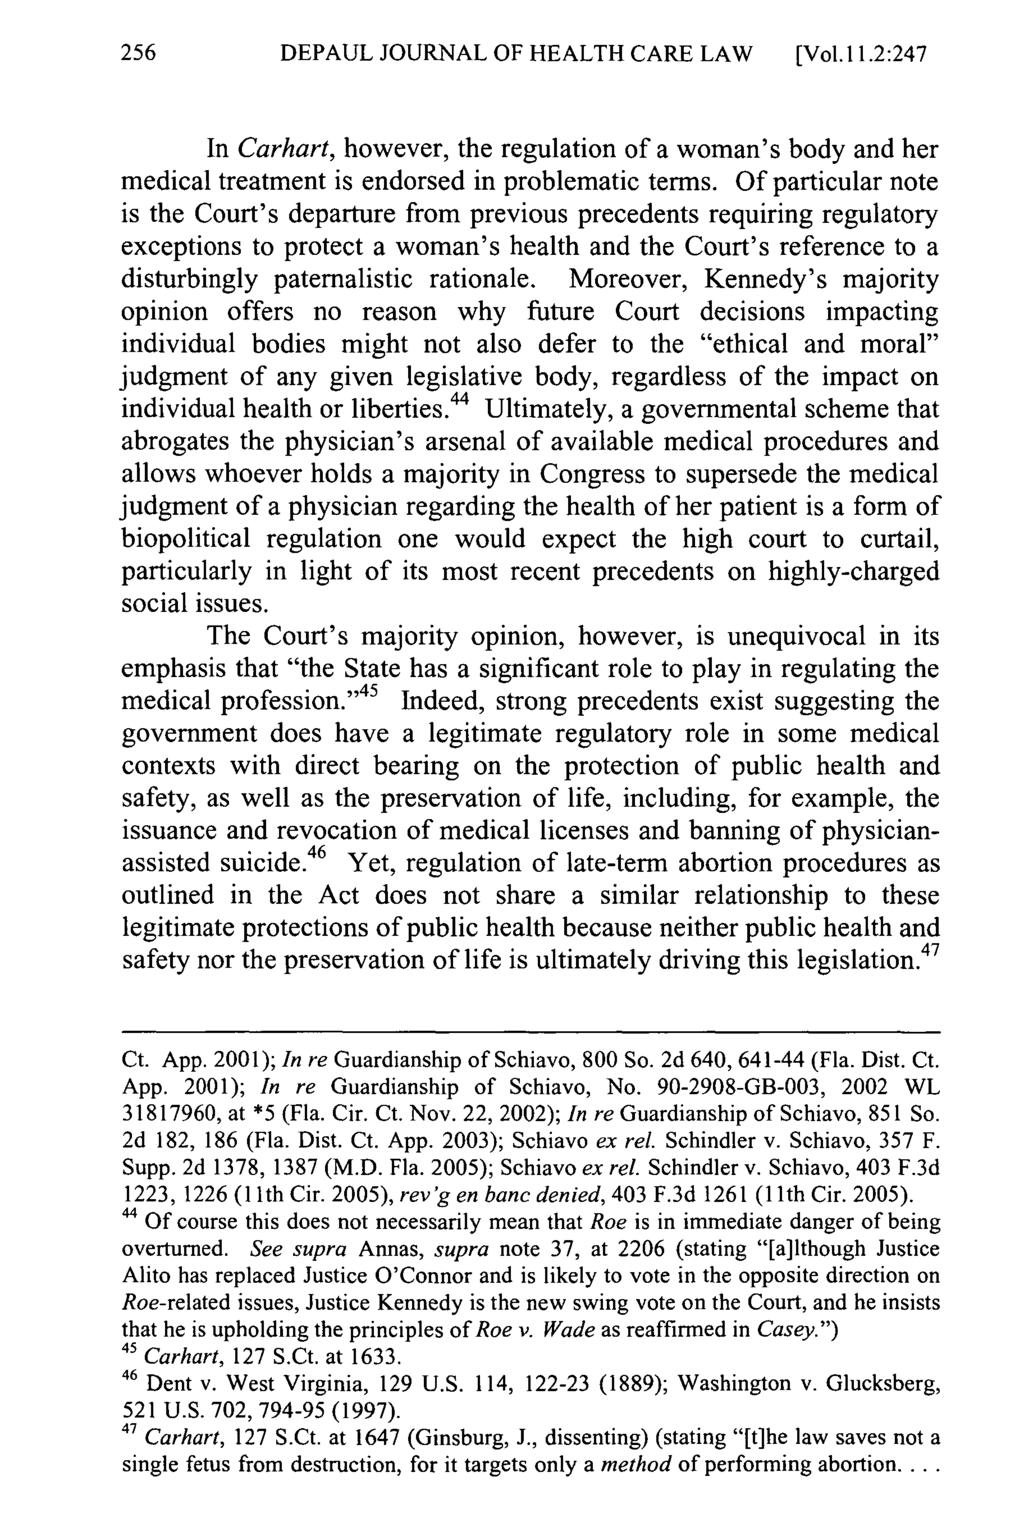 DEPAUL JOURNAL OF HEALTH CARE LAW [Vol. 11.2:247 In Carhart, however, the regulation of a woman's body and her medical treatment is endorsed in problematic terms.